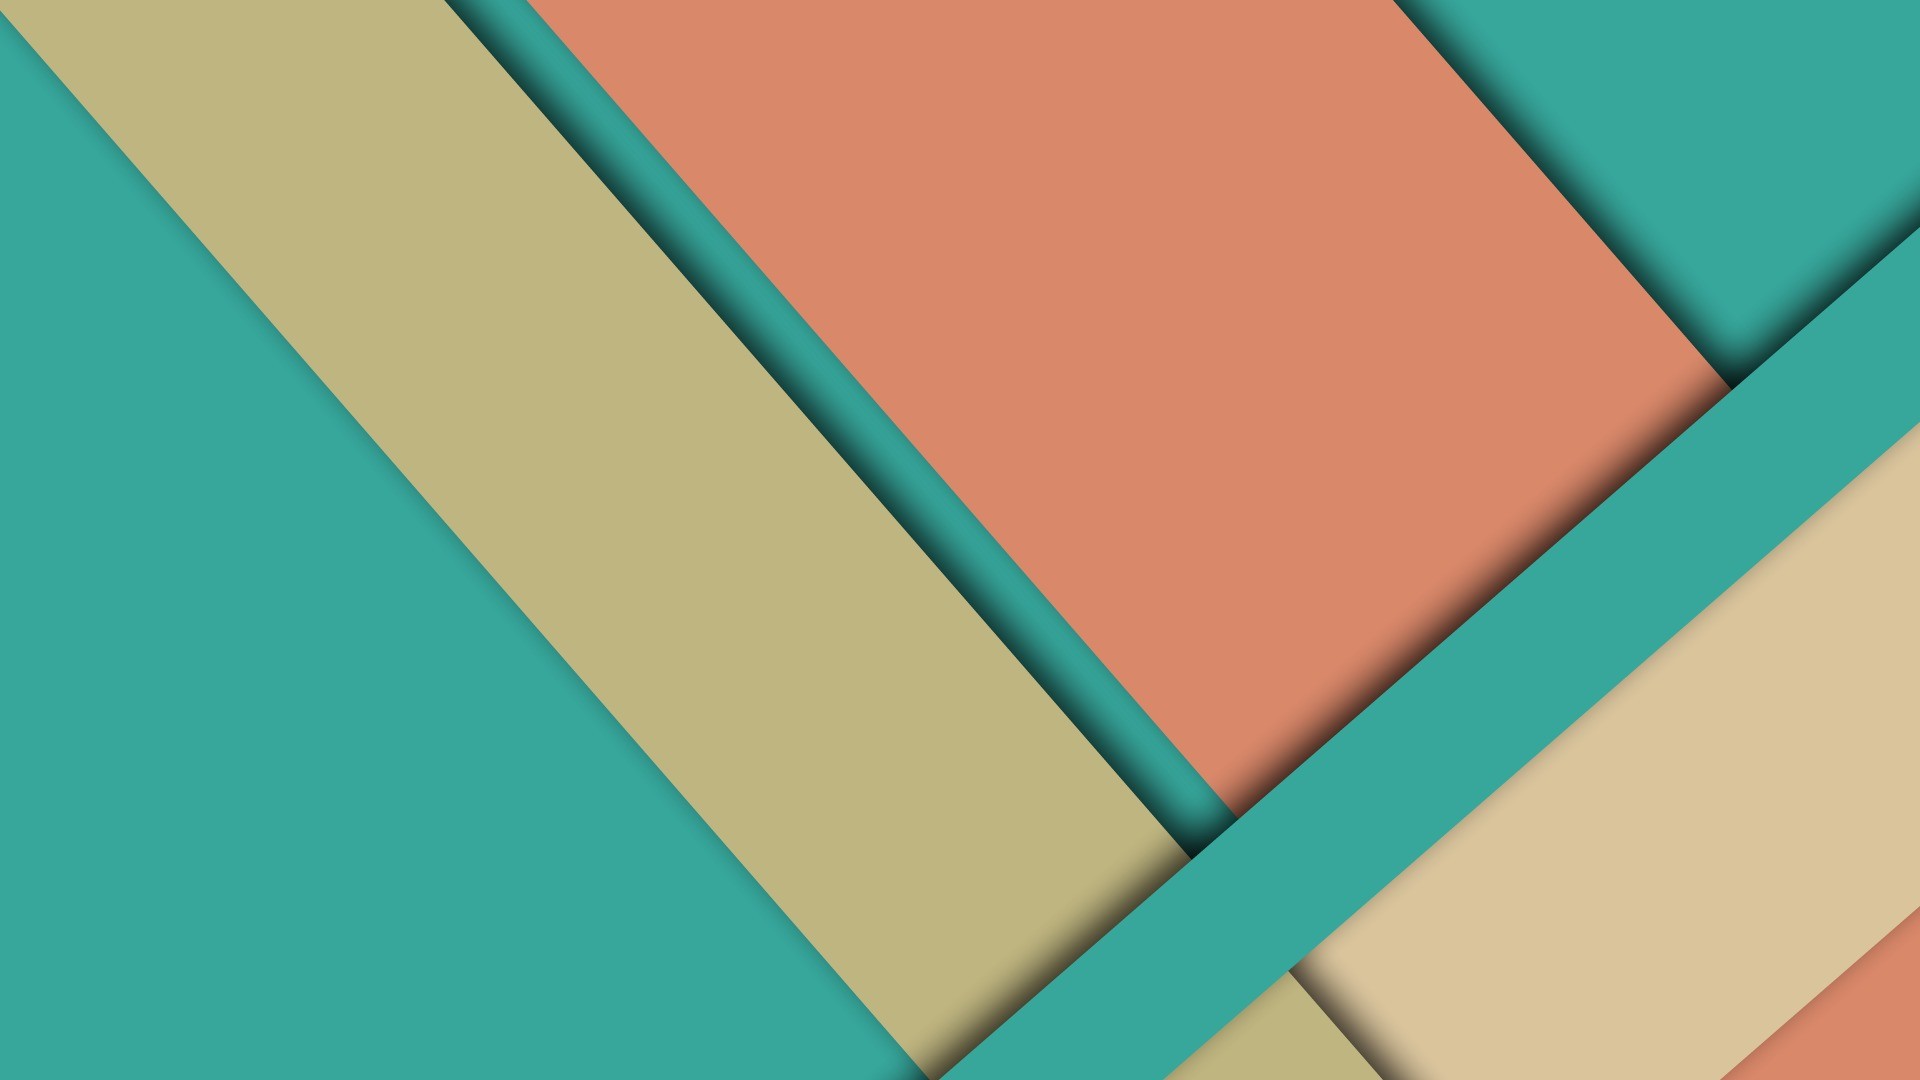 Geometric Abstract Wallpaper (62+ images)